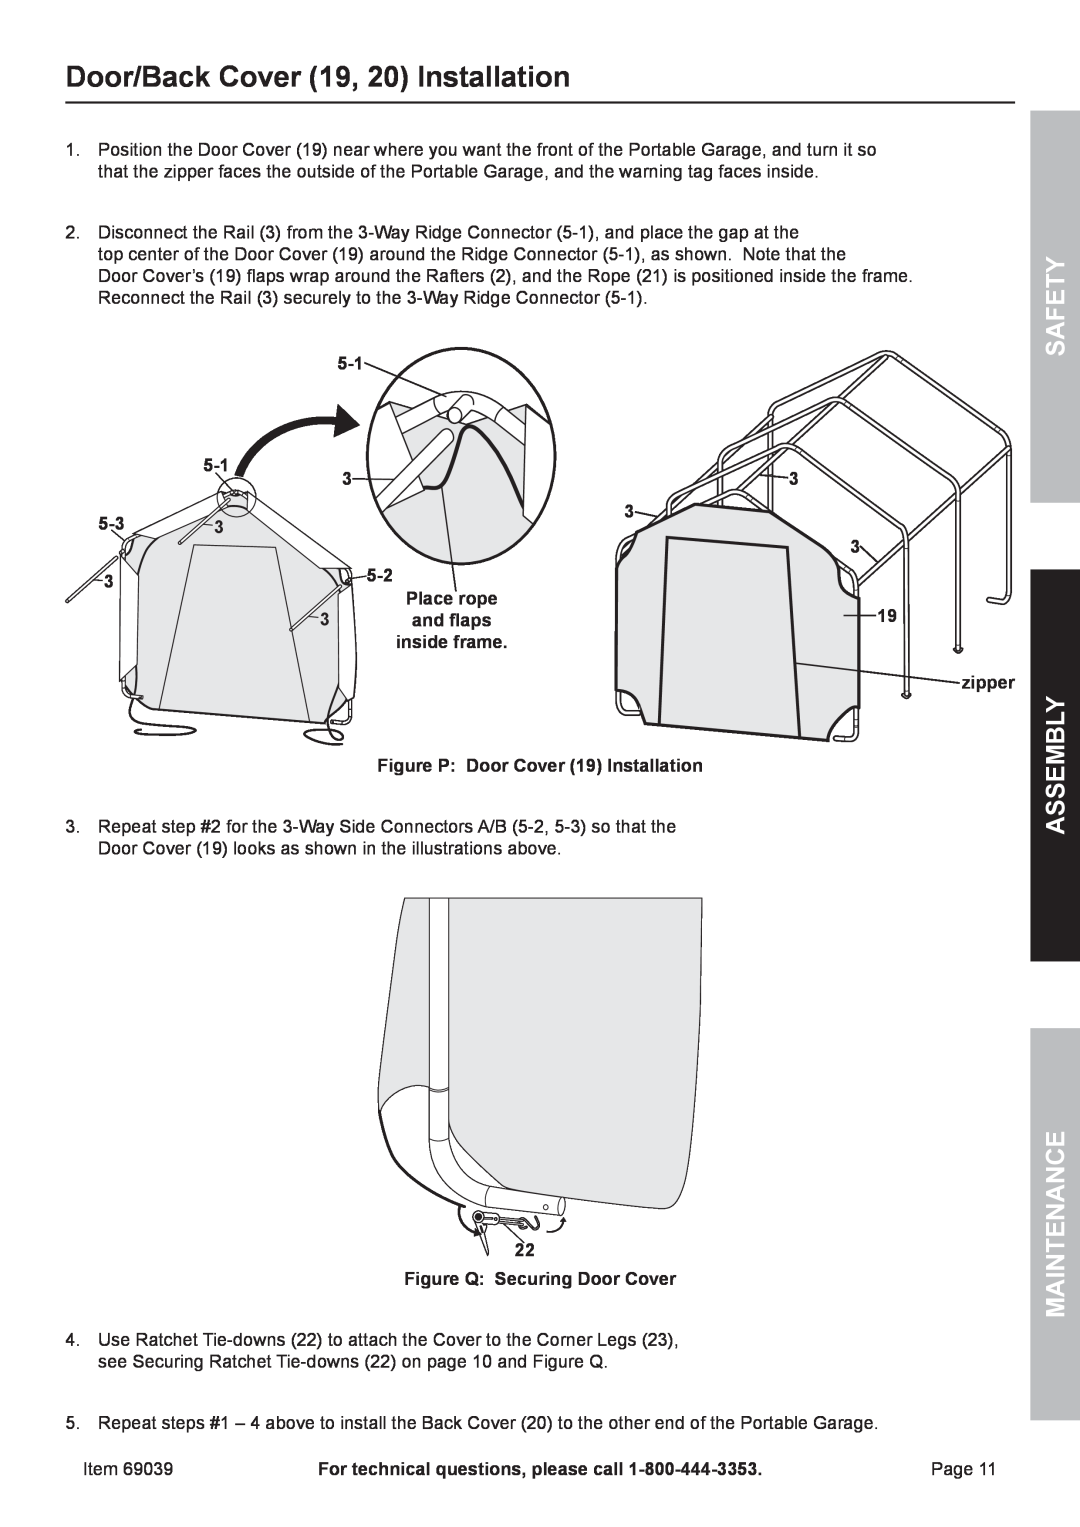 Harbor Freight Tools 69039 owner manual Door/Back Cover 19, 20 Installation, Assembly Maintenance, and flaps, Safety 